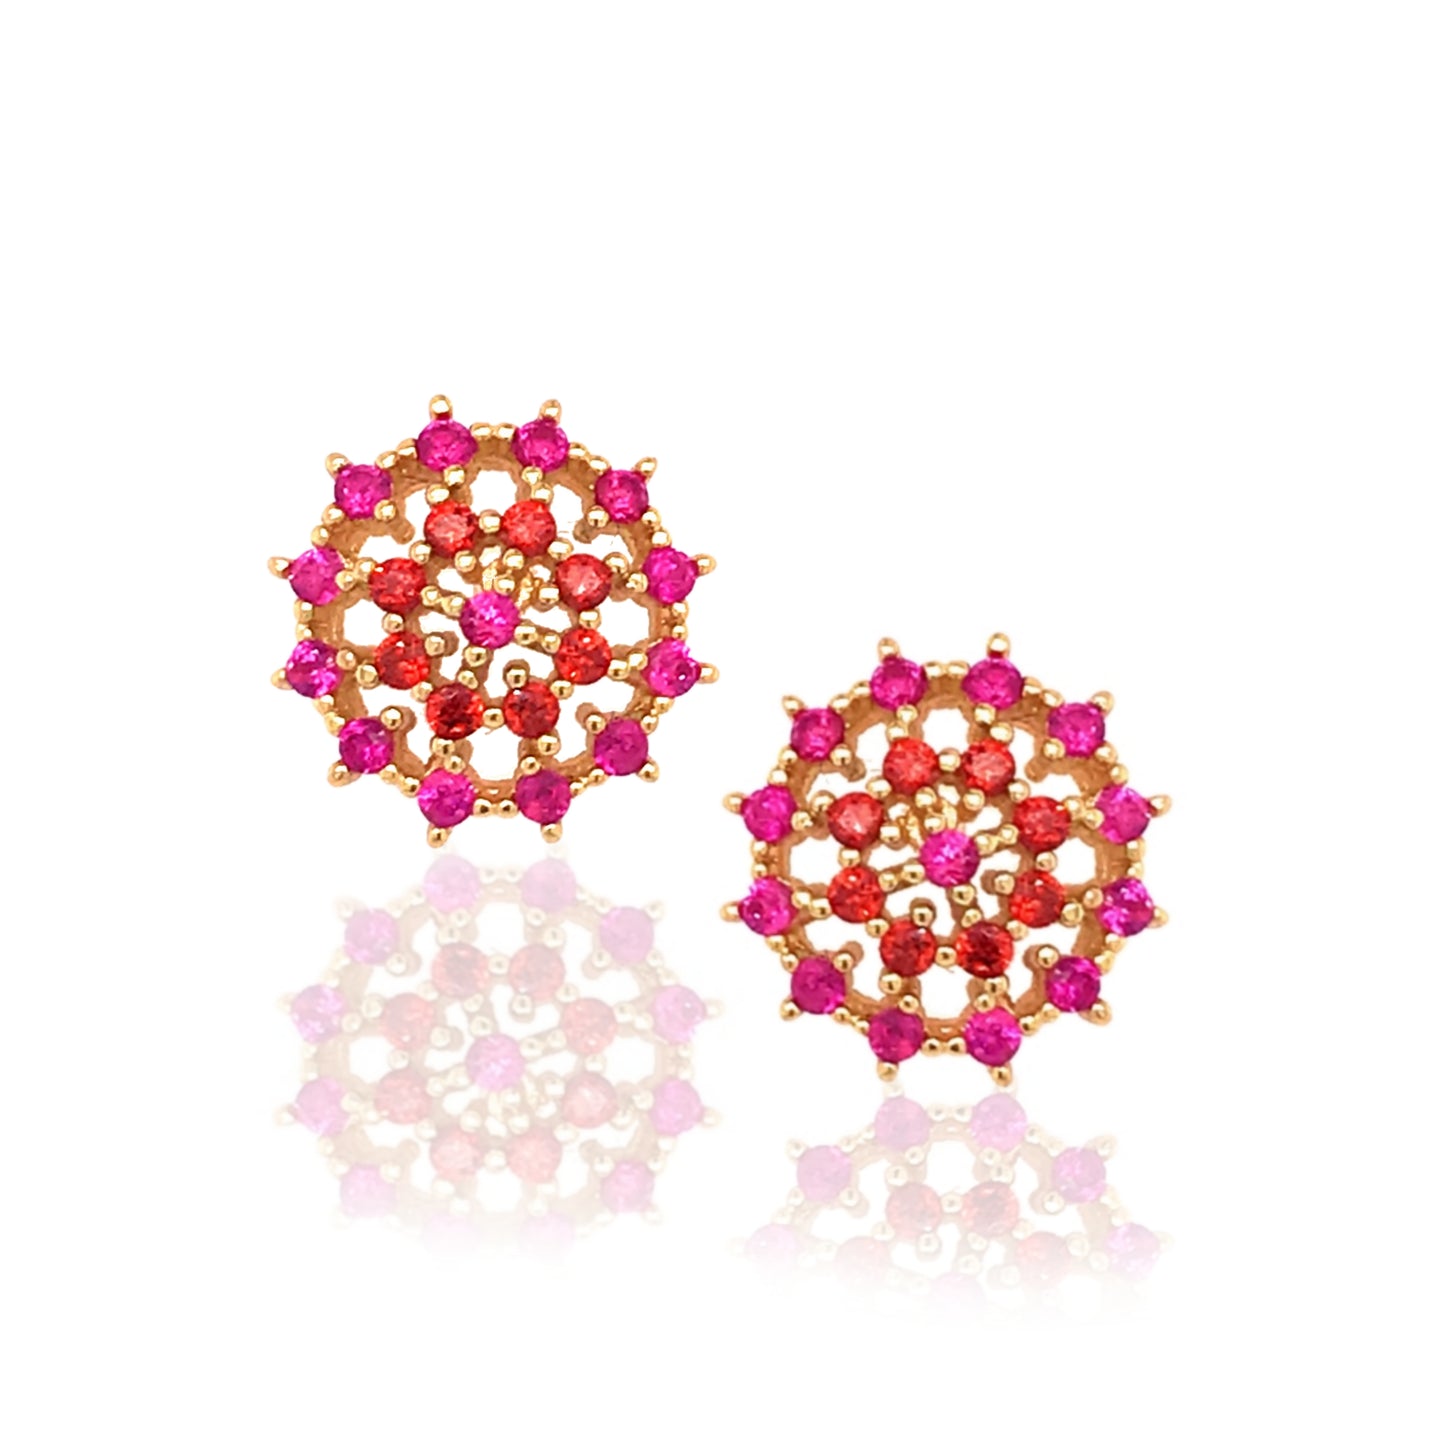 Gold Plated Sterling Silver Round Stud Earrings - HK Jewels